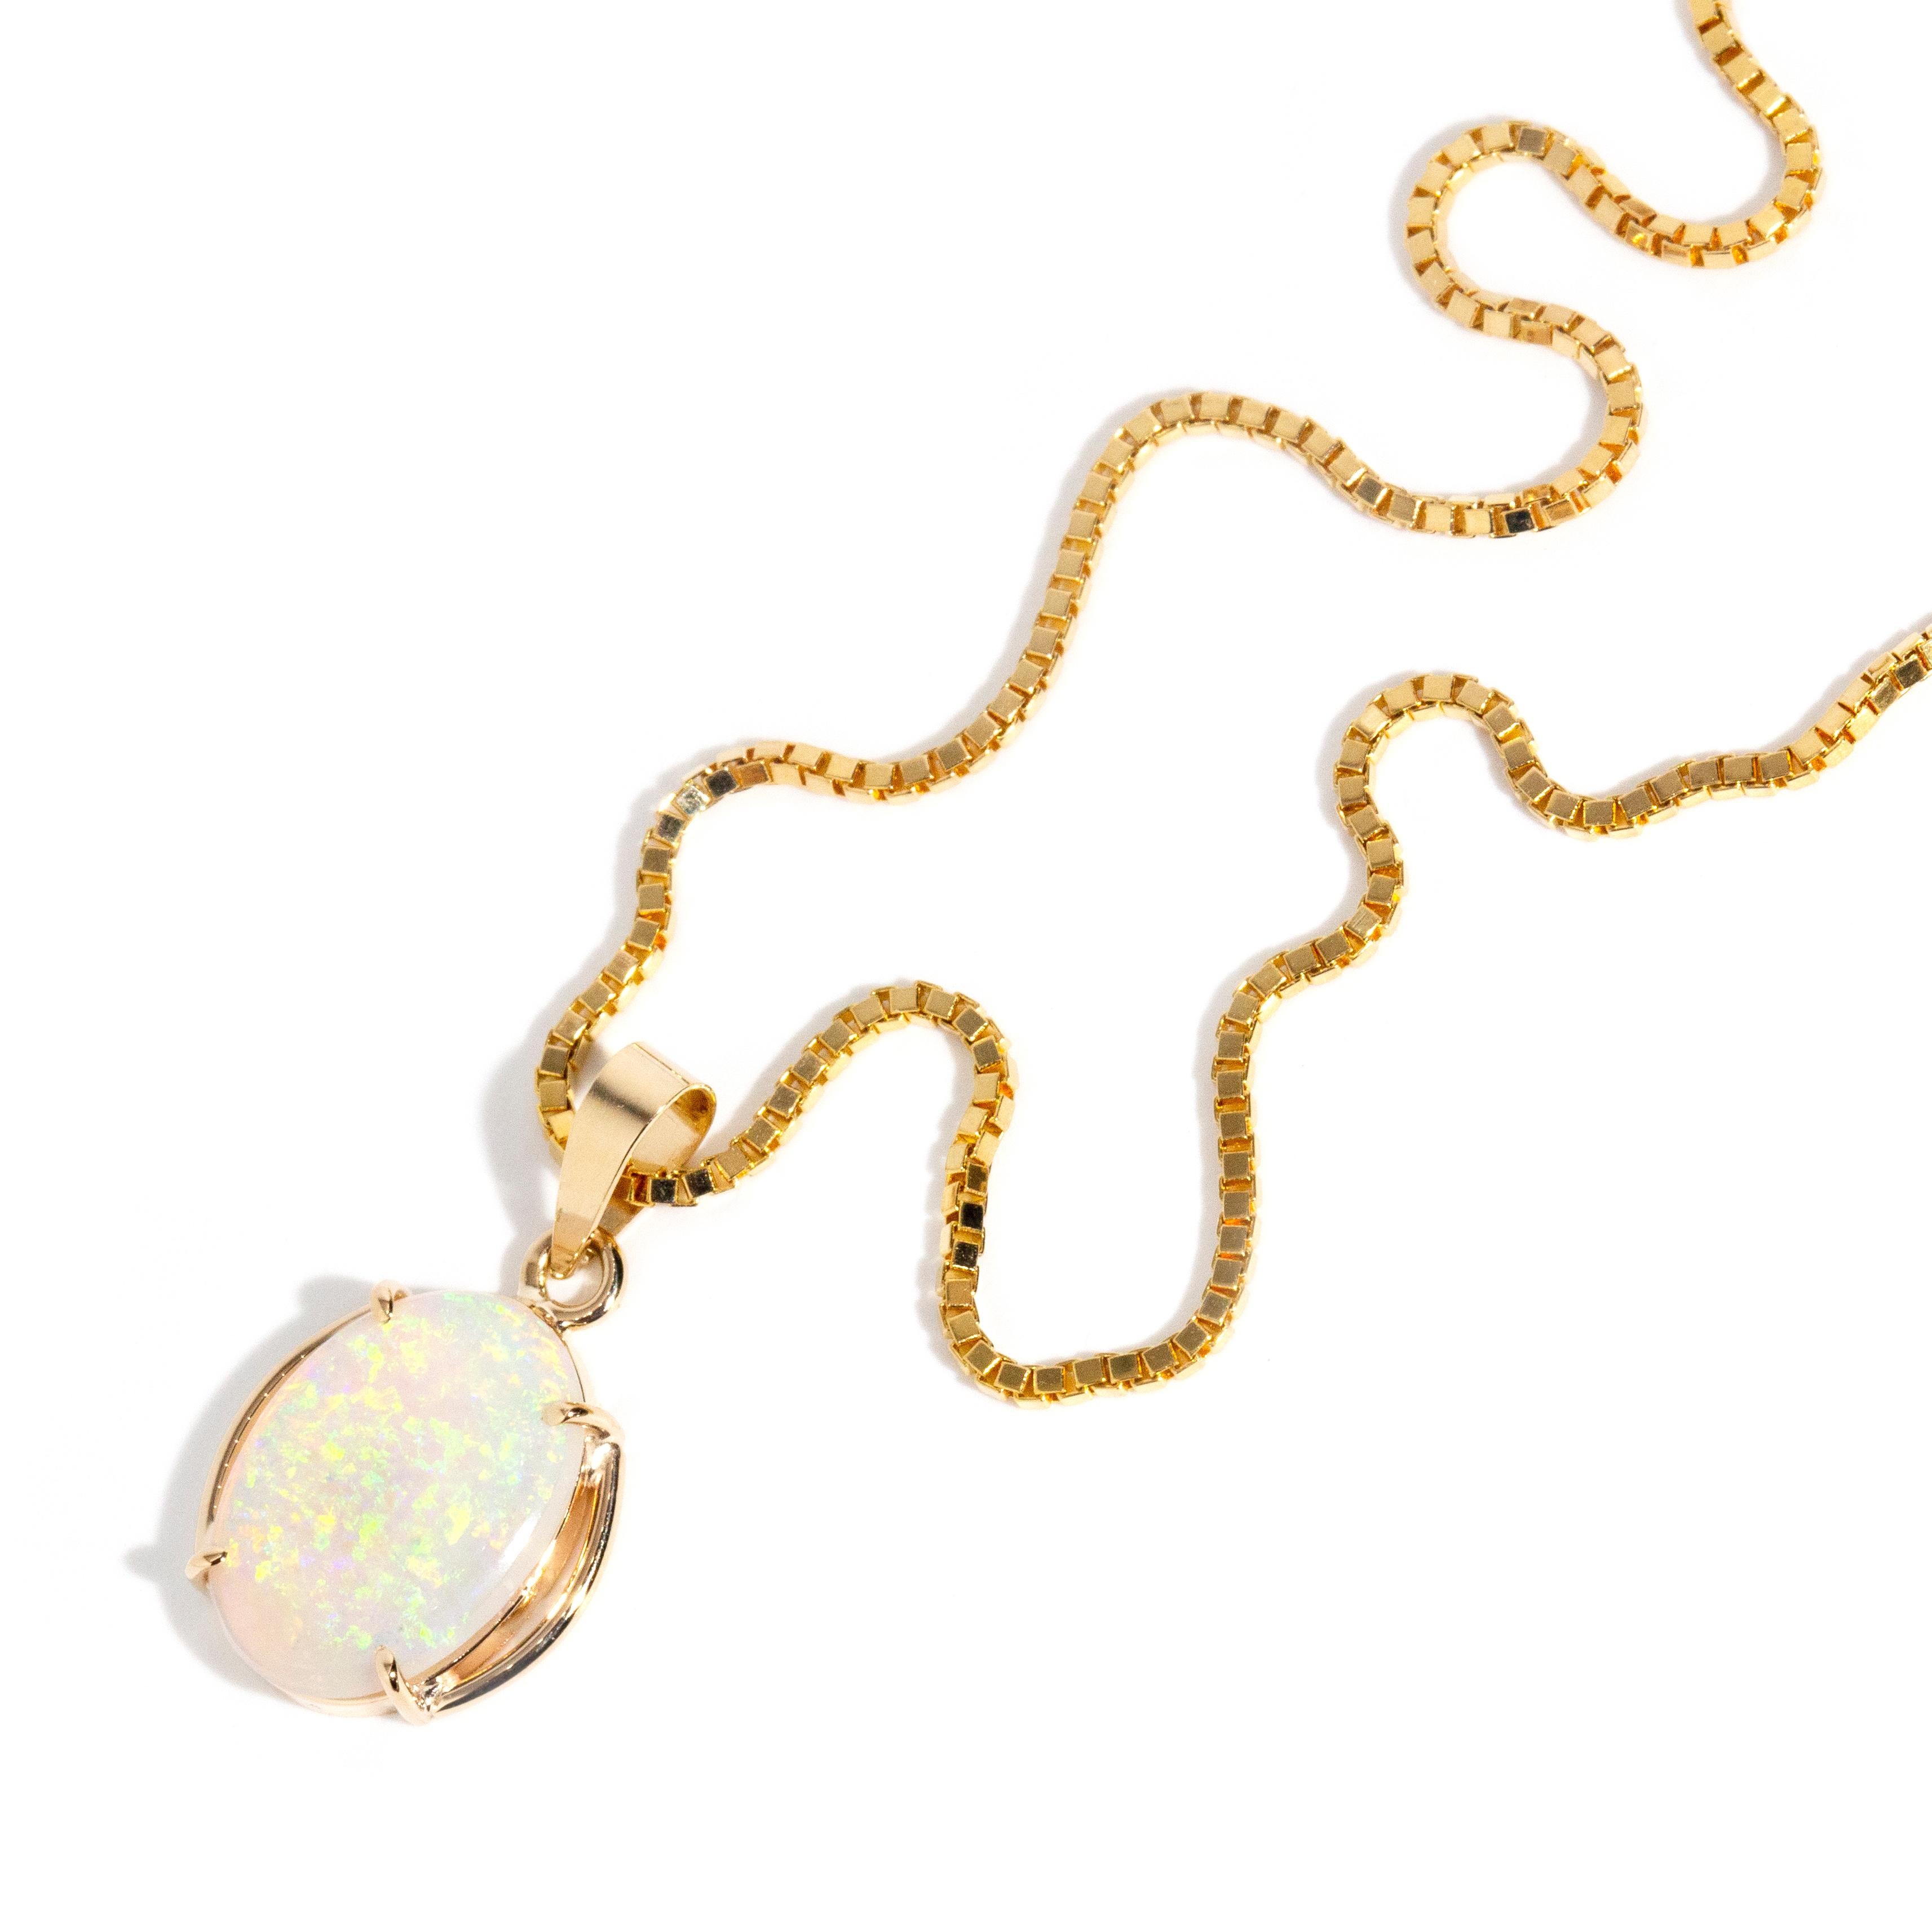 Modern Vintage circa 1980s 14 Carat Yellow Gold Oval Crystal Opal Pendant & Fine Chain